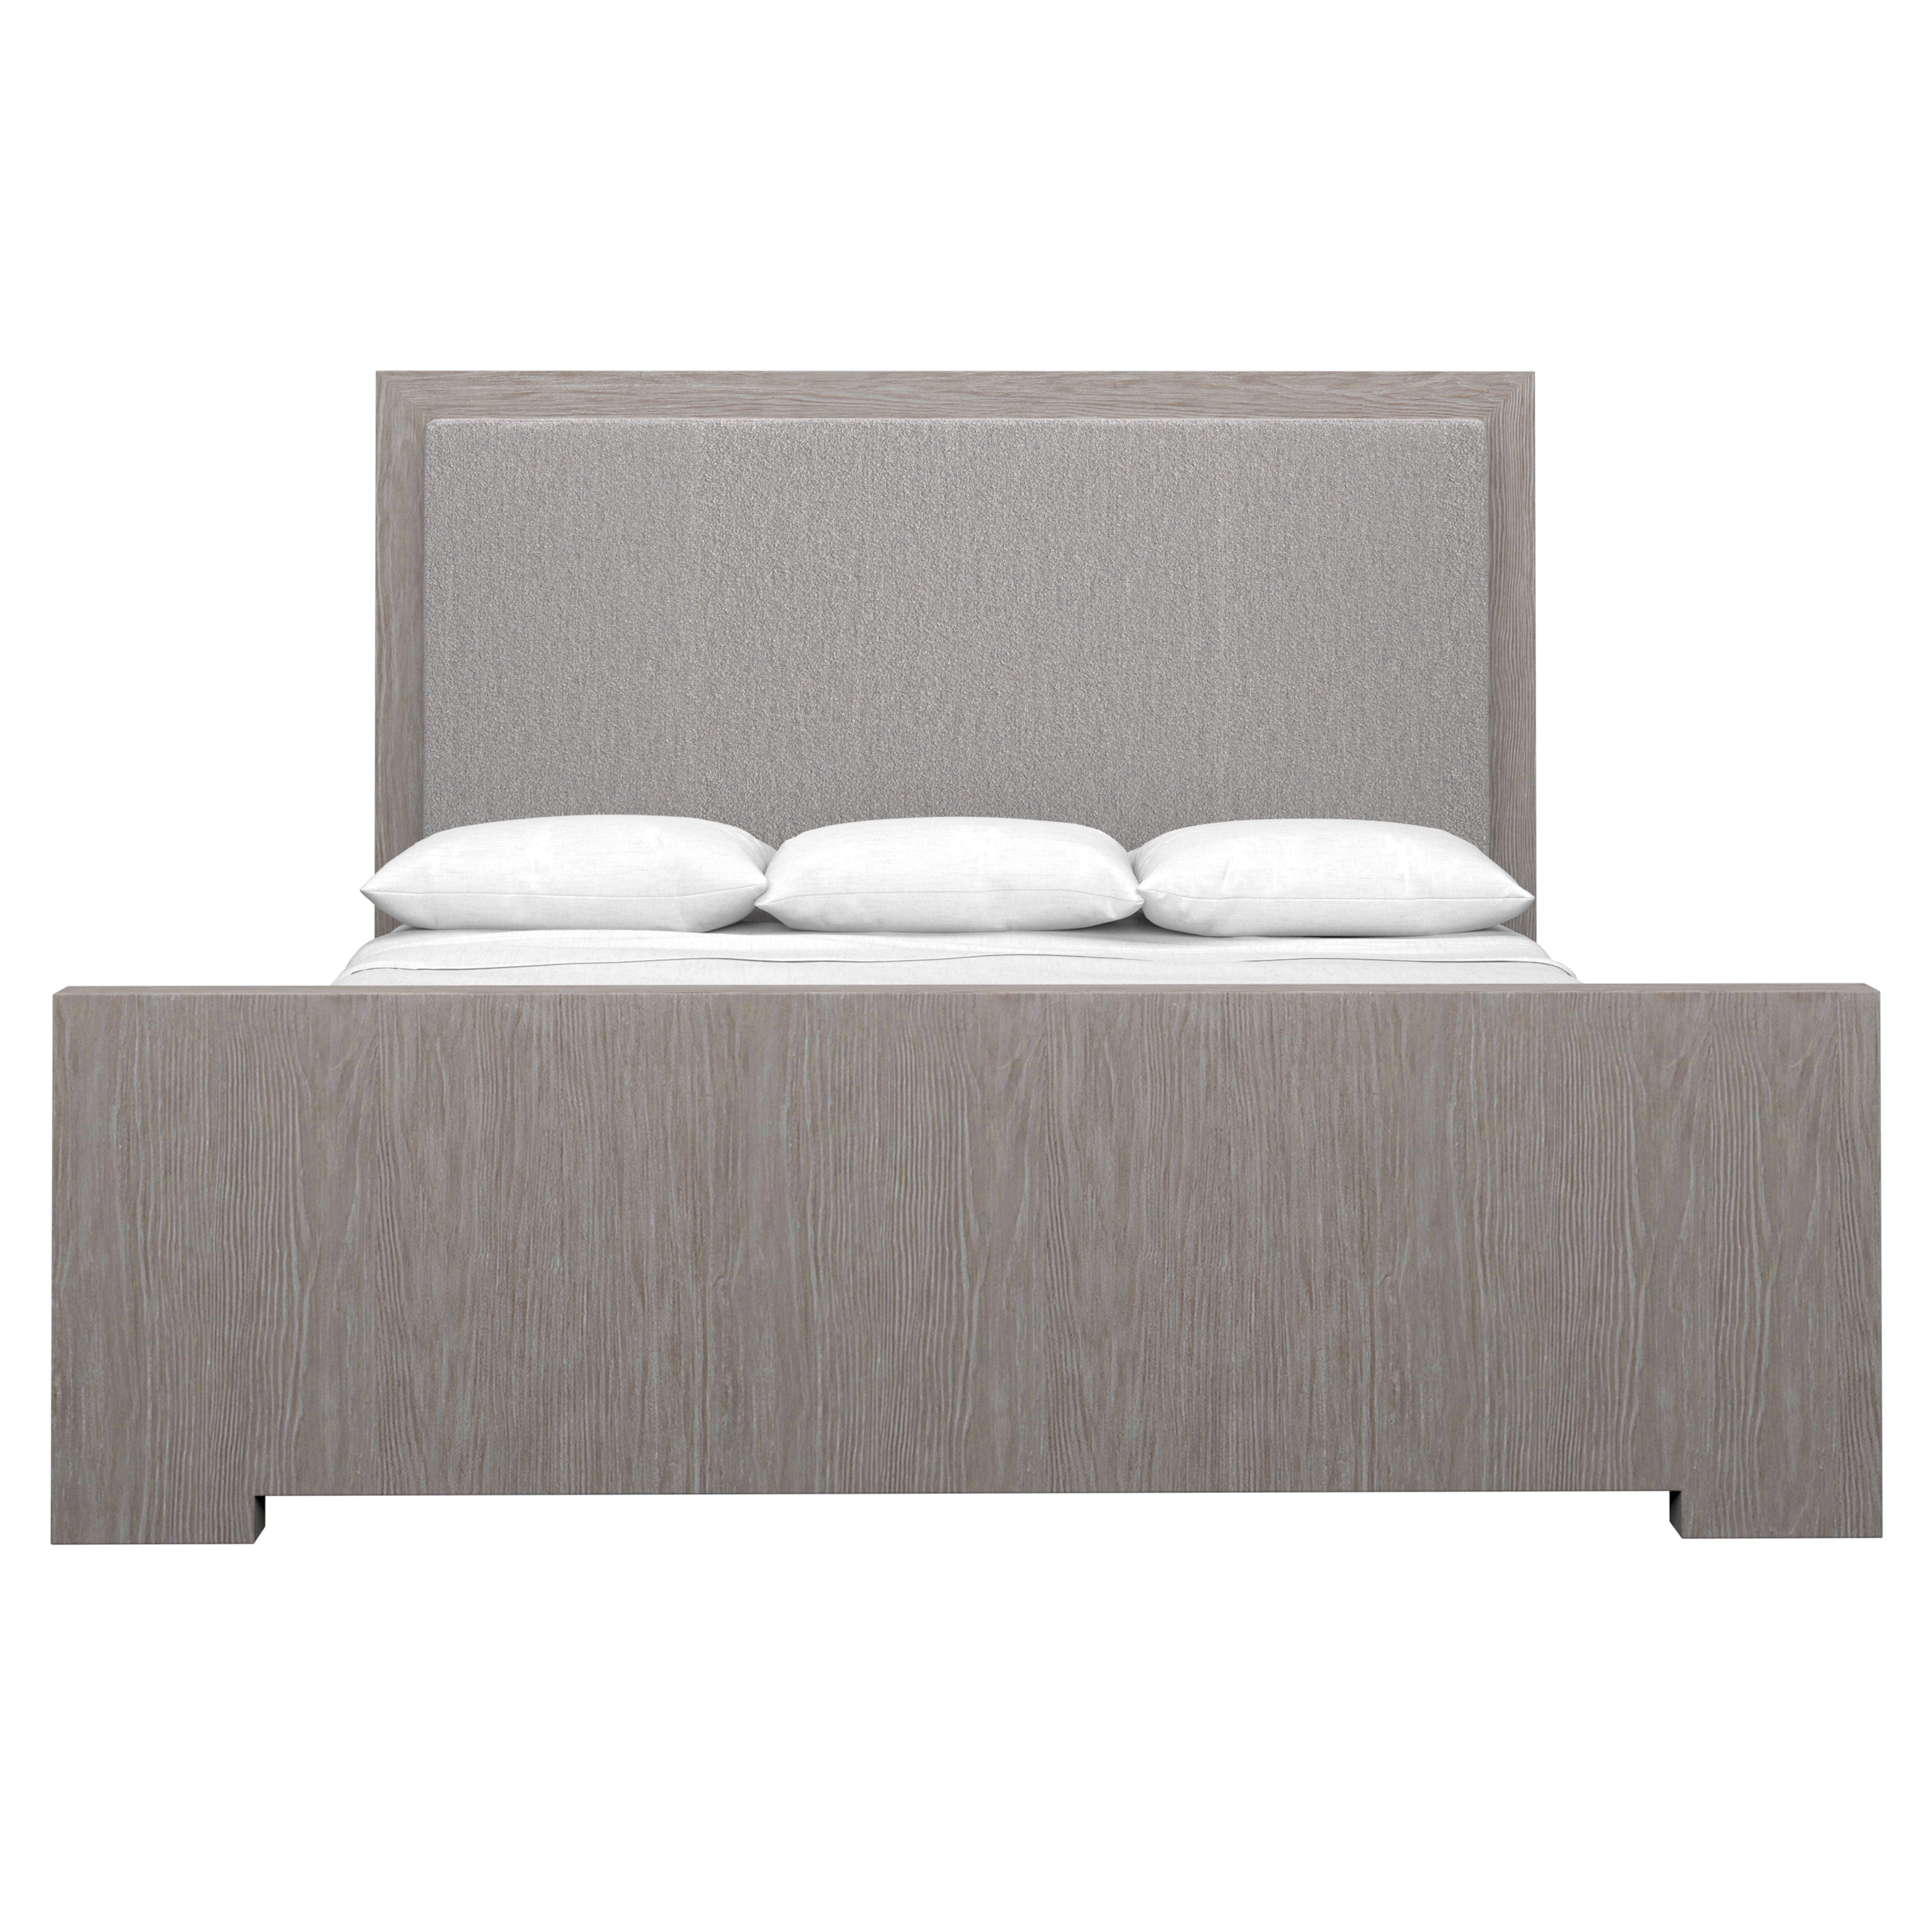 Trianon King Panel Bed in Gris Wood Finish